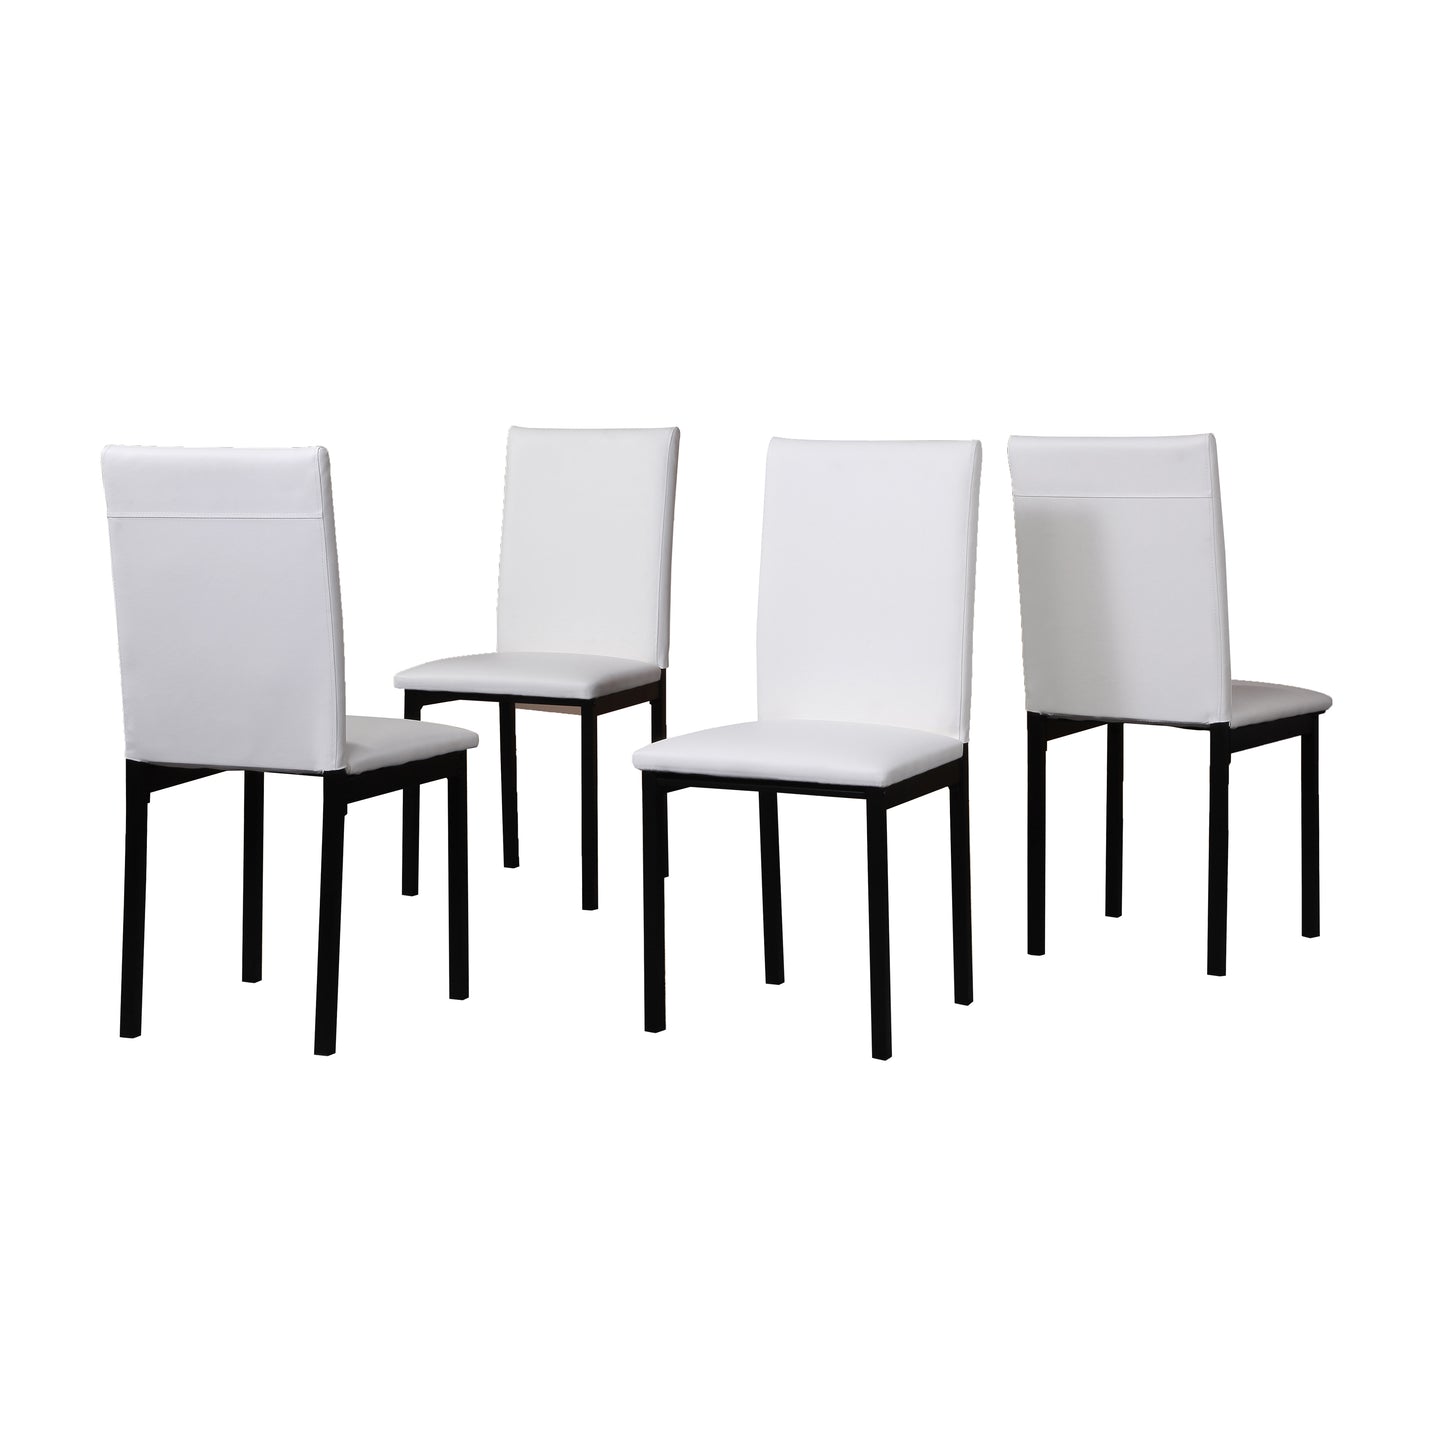 Citico 5-Piece Metal Dinette Set with Laminated Off-white Faux Marble Top, 4 White Chairs